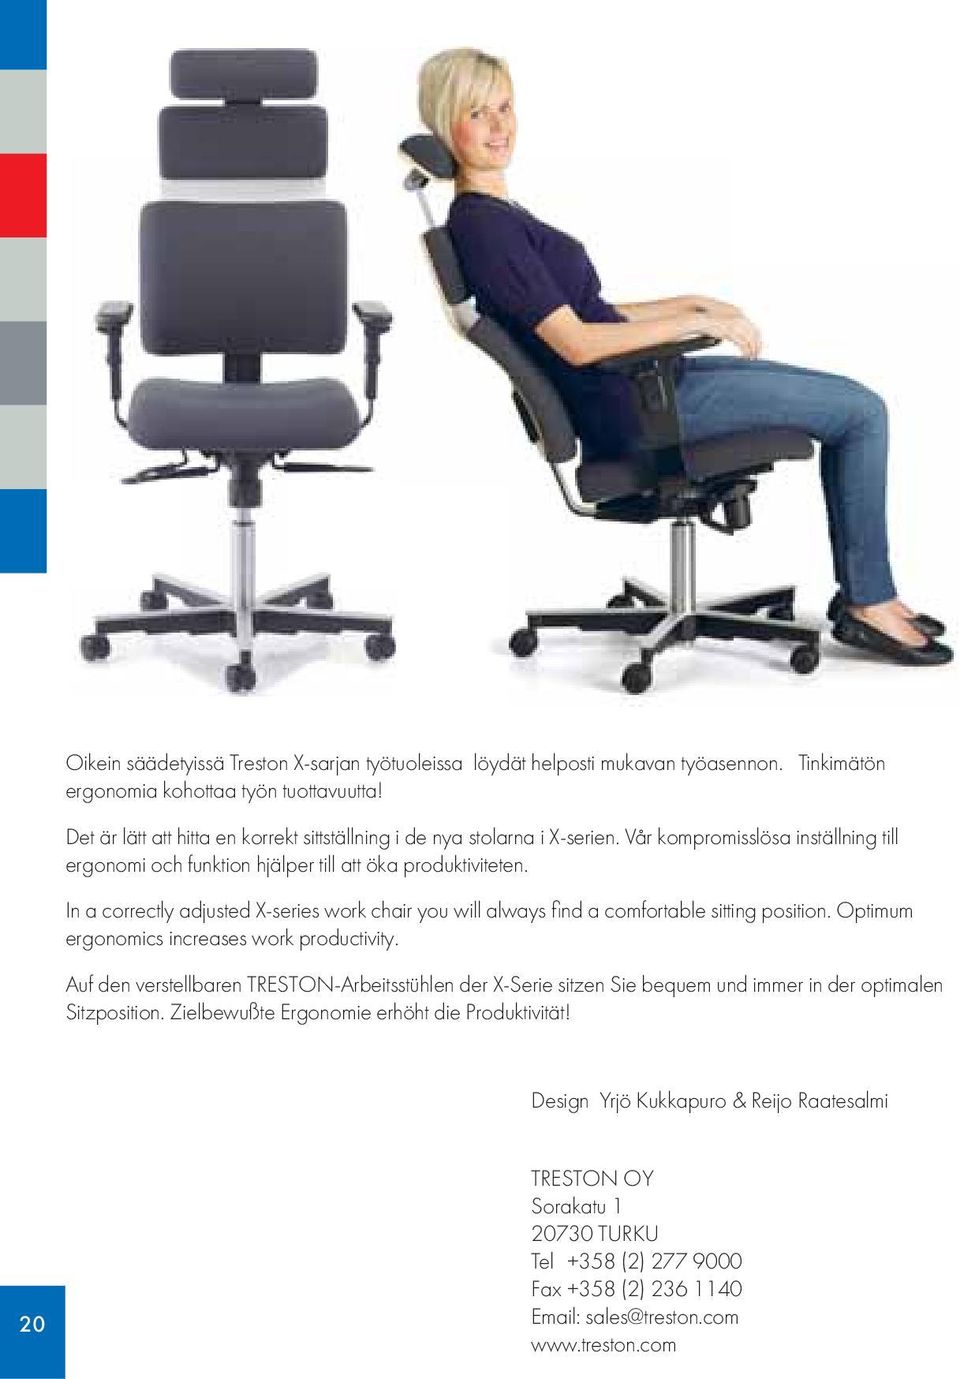 In a correctly adjusted X-series work chair you will always fi nd a comfortable sitting position. Optimum ergonomics increases work productivity.